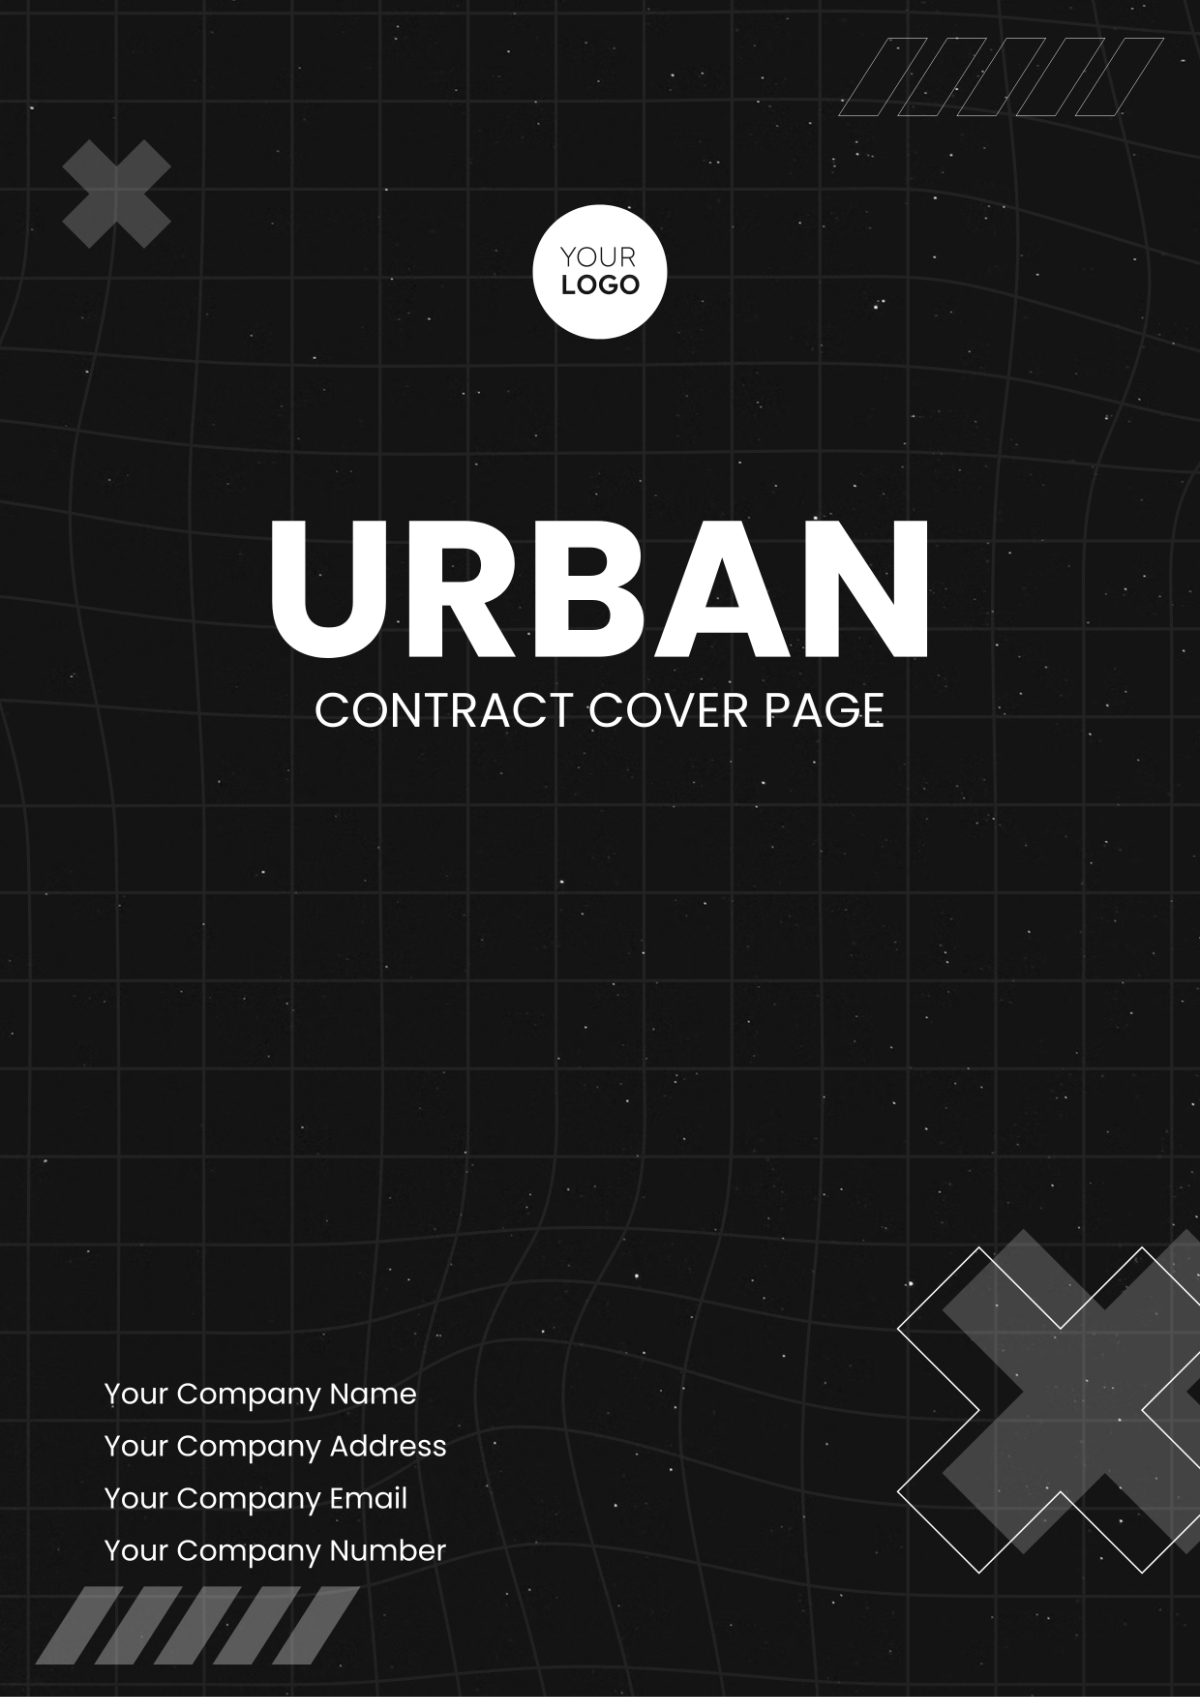 Urban Contract Cover Page